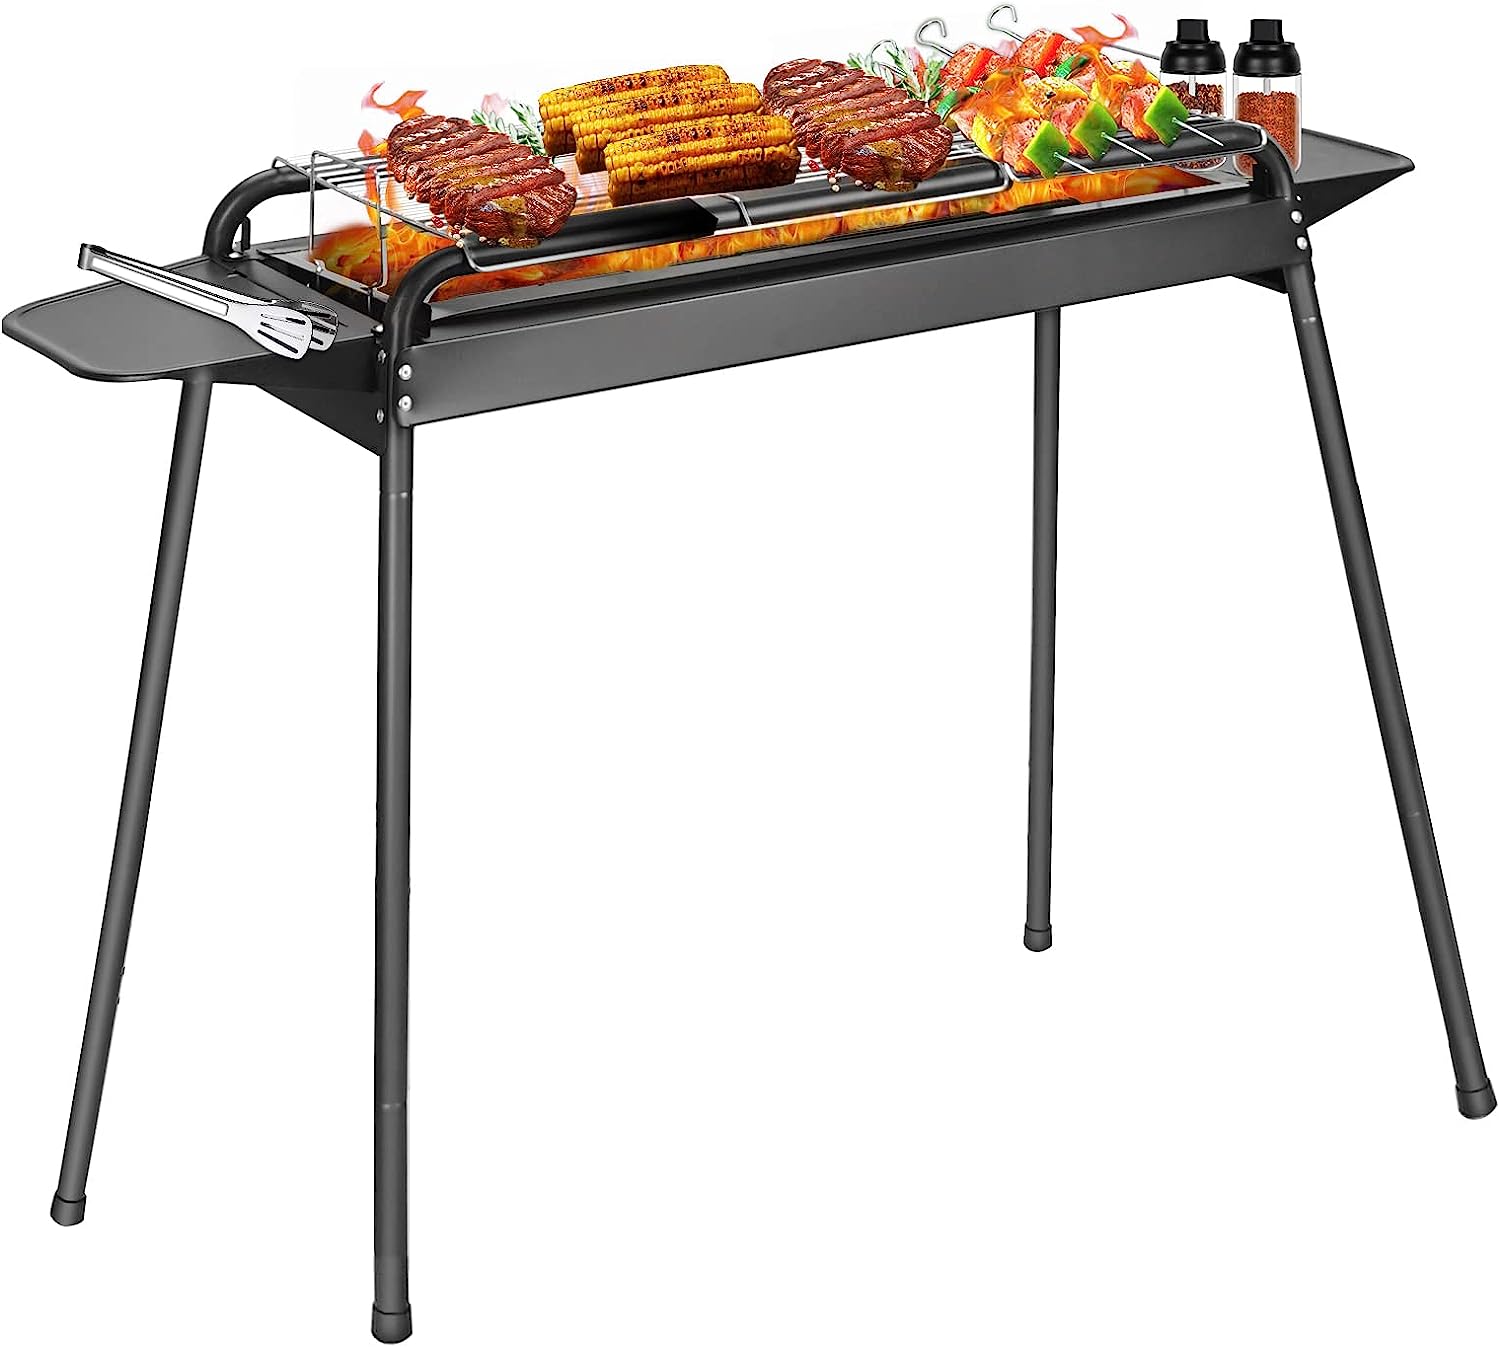 TANGME Portable Charcoal Grills Height Adjustable [...]